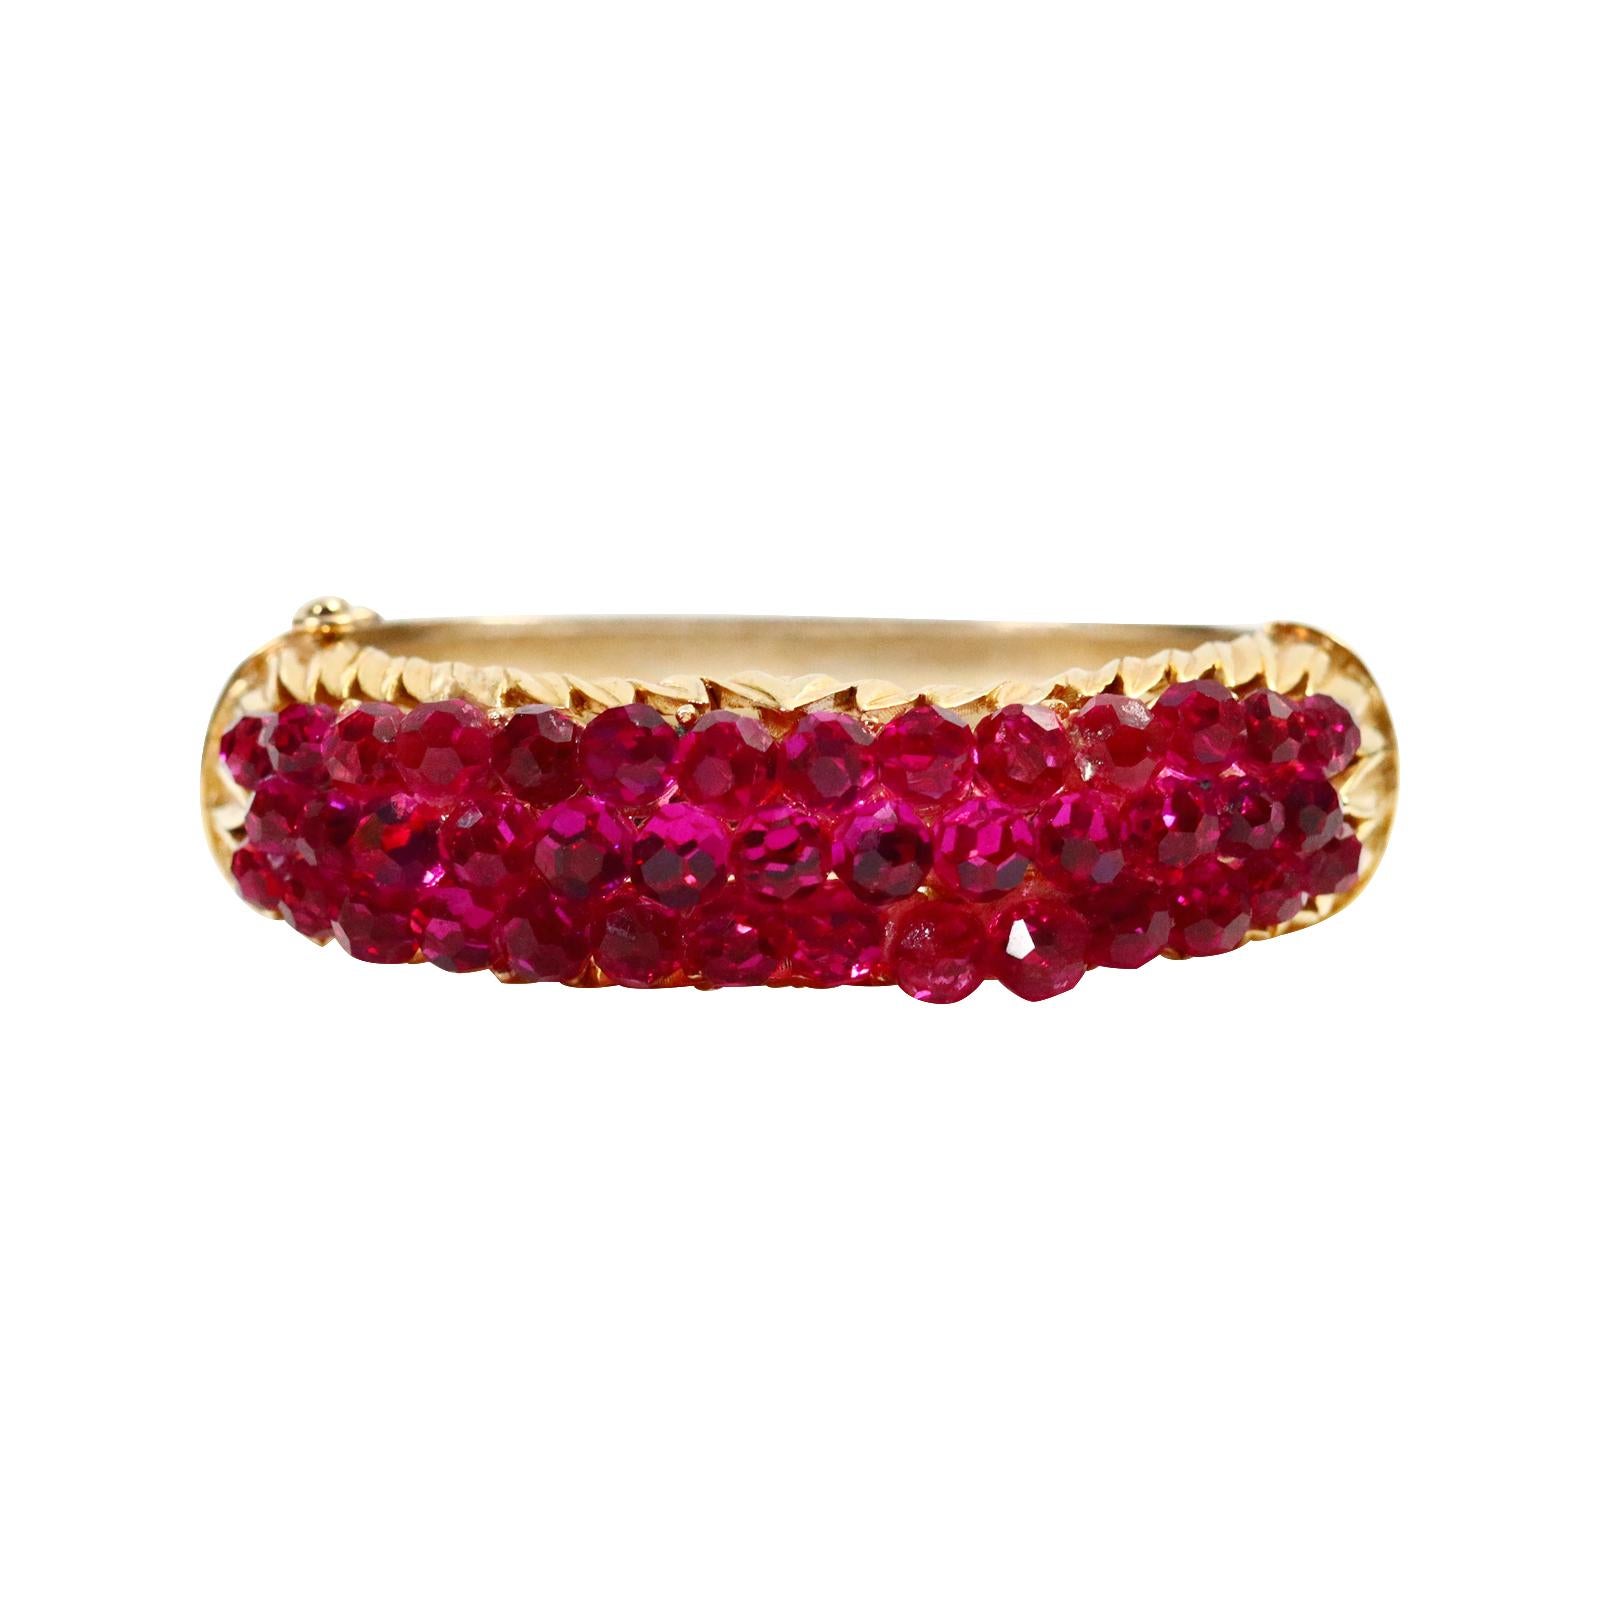 Modern Vintage Trifari Gold Tone Bracelet with Pink Beads Circa 1980s For Sale